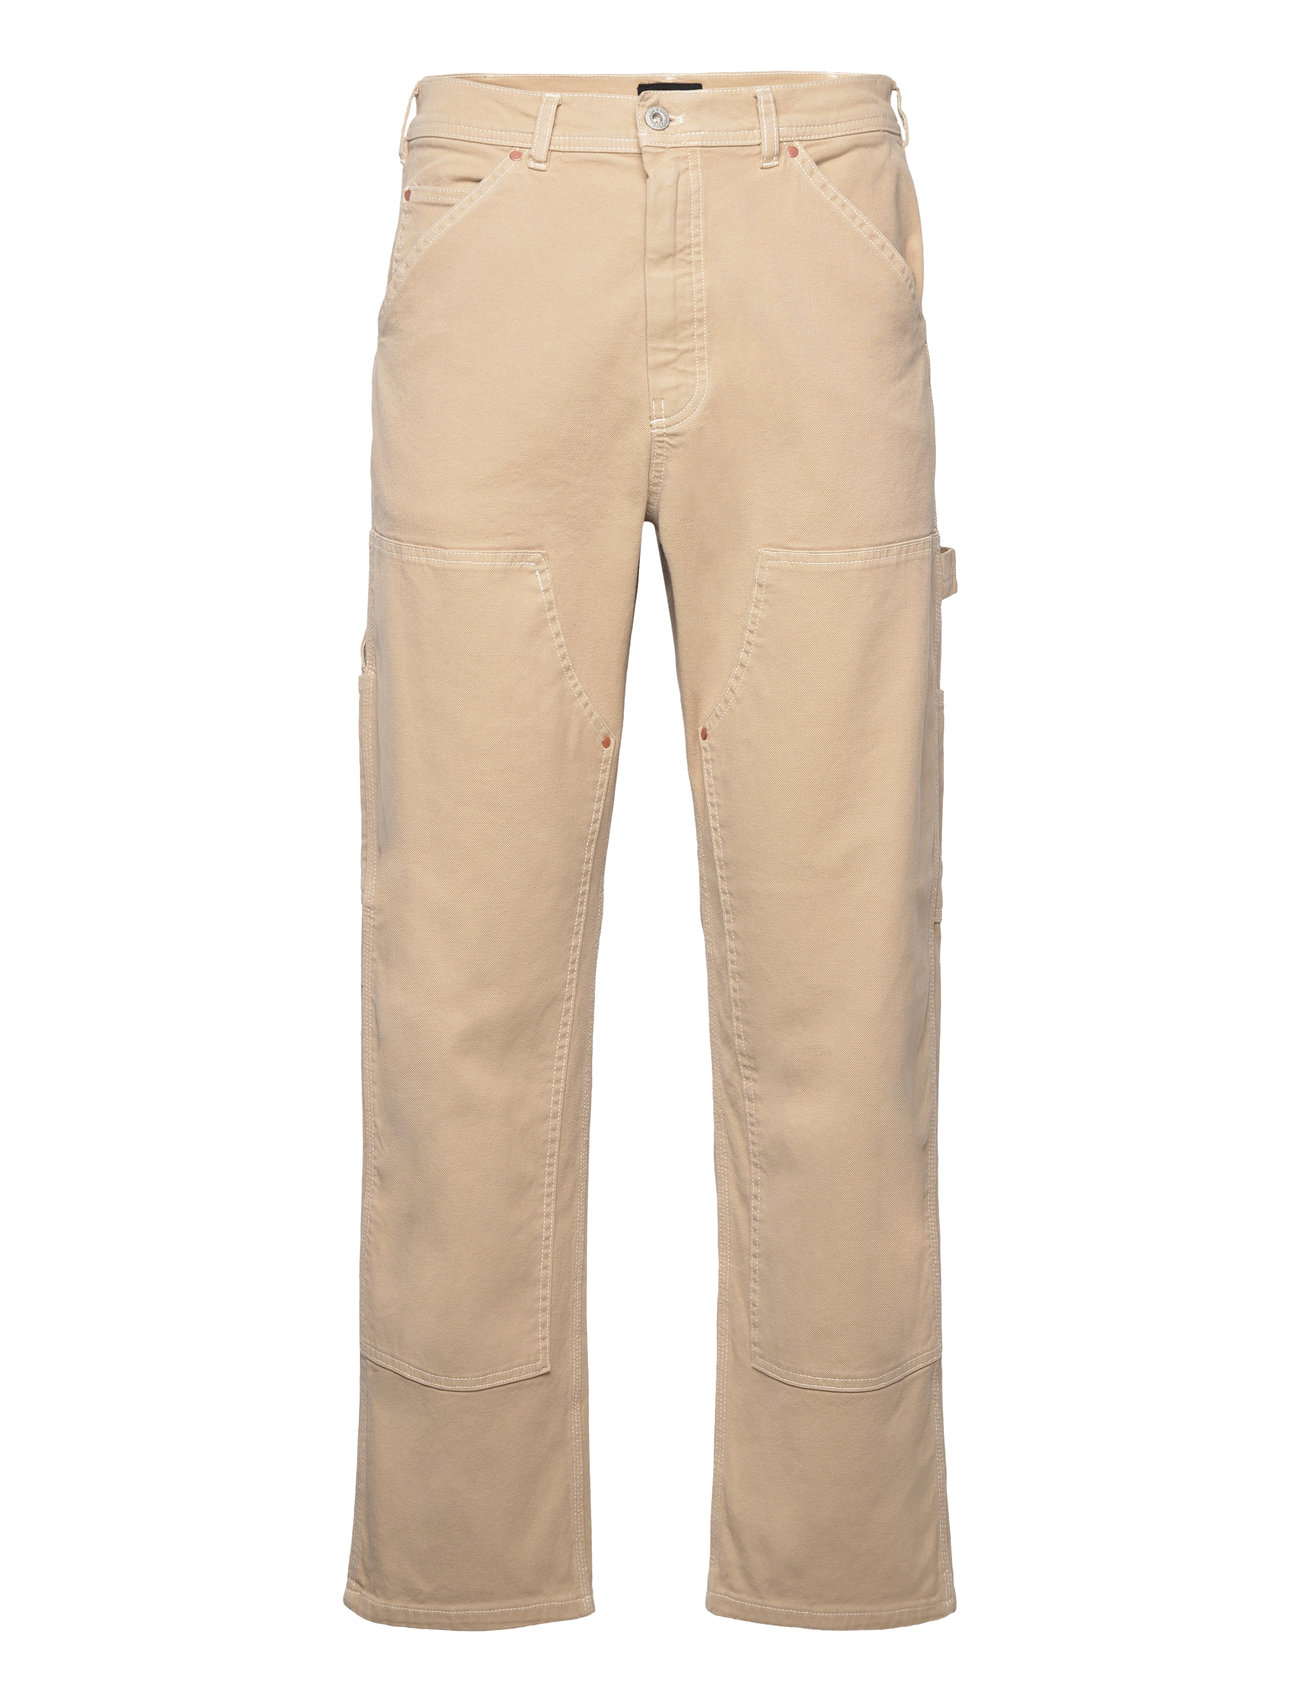 Double Knee Pant Designers Trousers Cargo Pants Beige Stan Ray